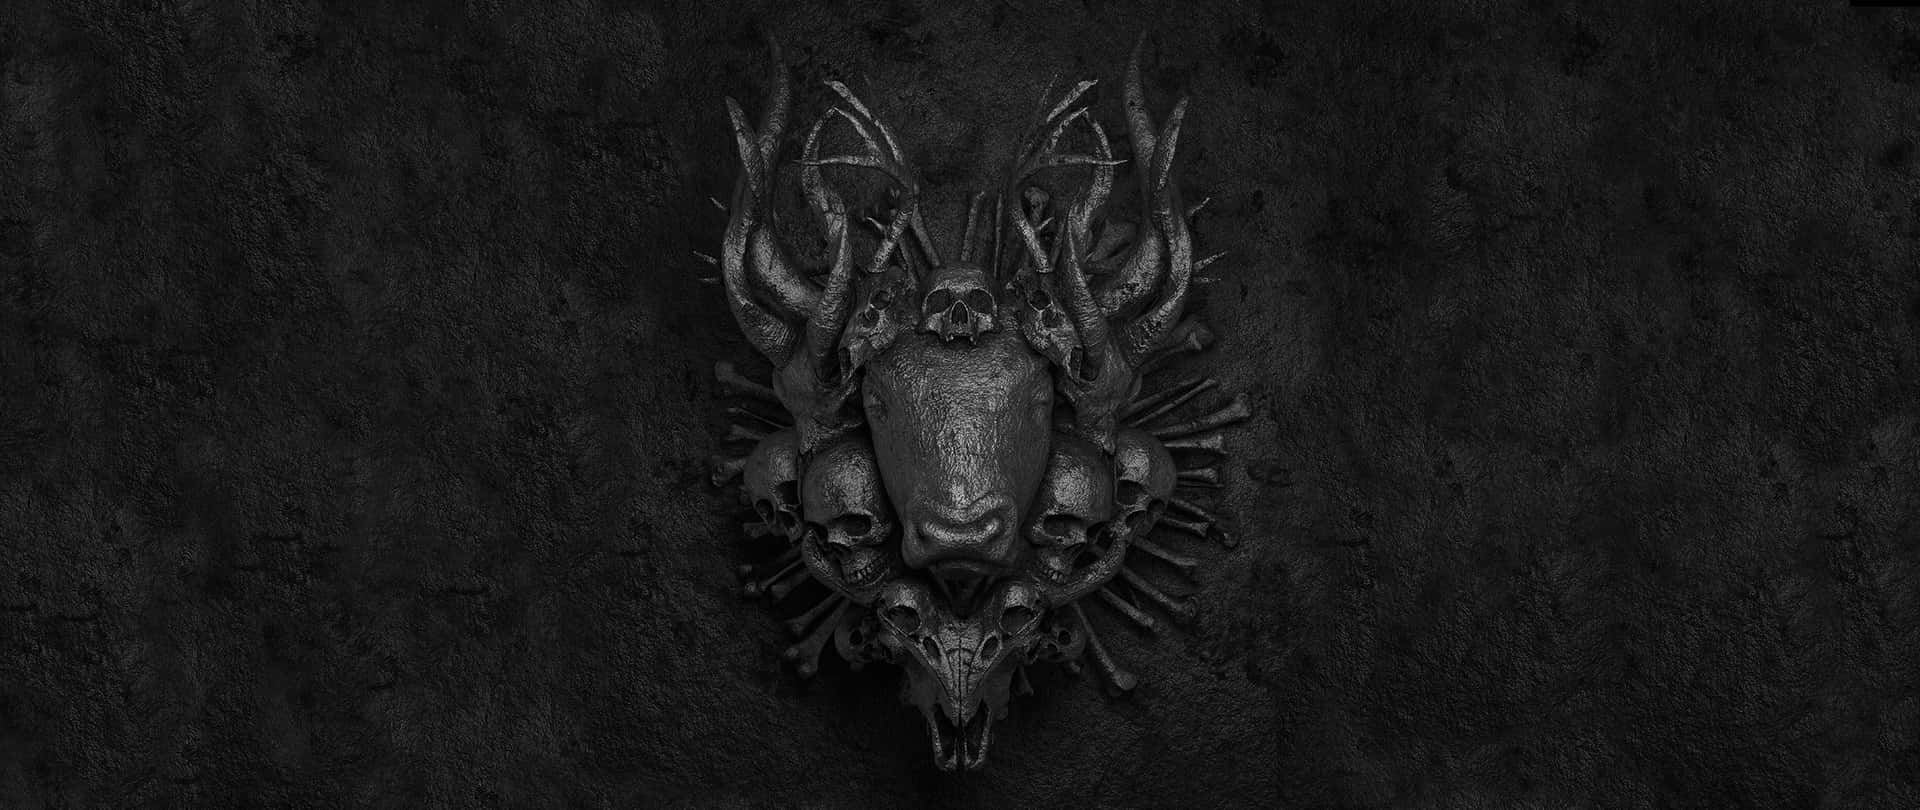 A Black And White Image Of A Skull On A Wall Wallpaper